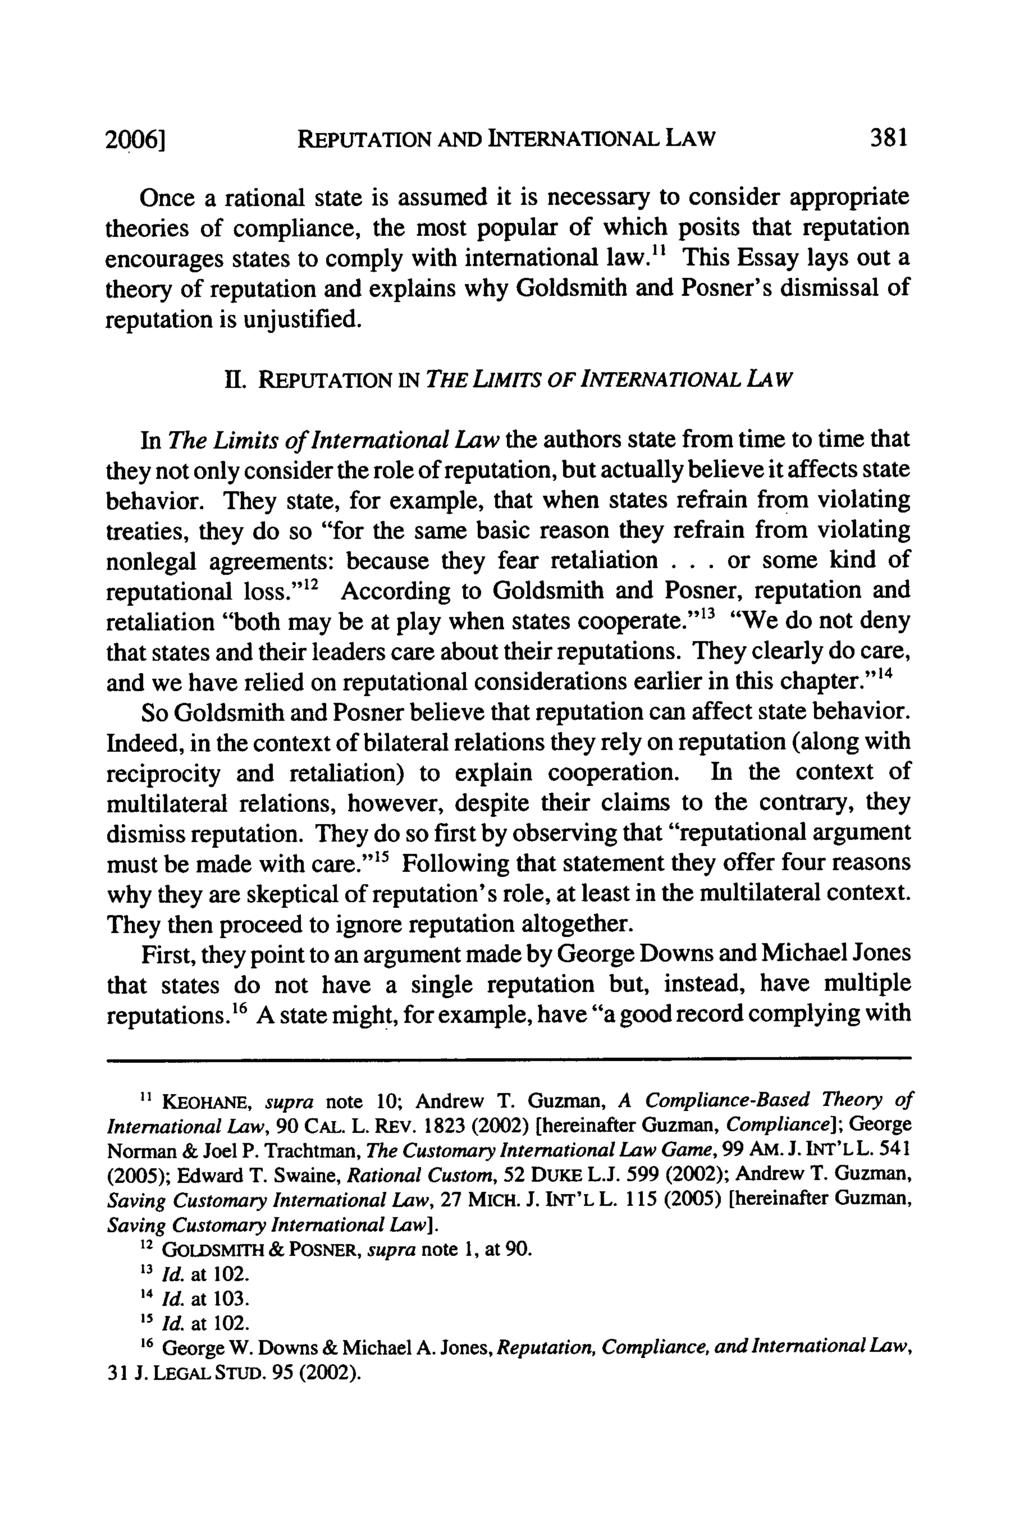 2006] REPUTATION AND INTERNATIONAL LAW Once a rational state is assumed it is necessary to consider appropriate theories of compliance, the most popular of which posits that reputation encourages